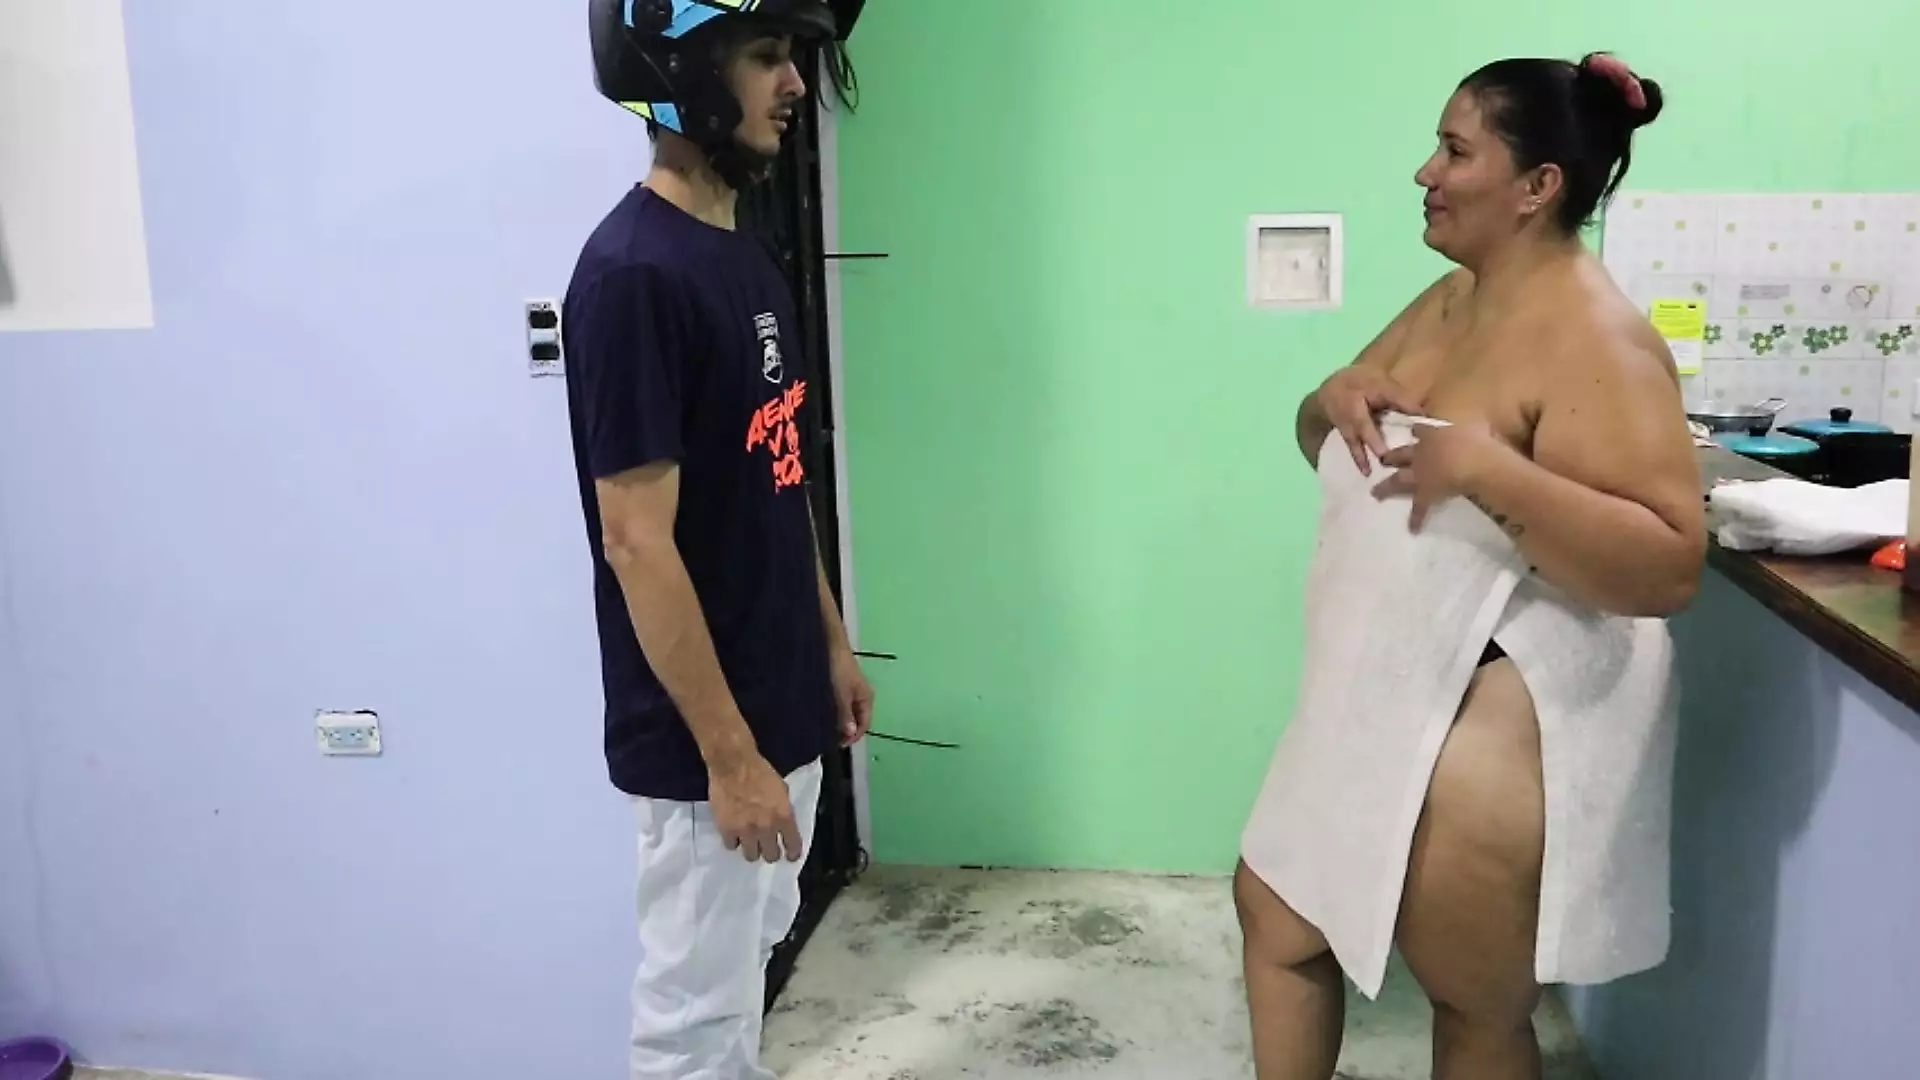 Pizza delivery guy fucks a big ass woman pic